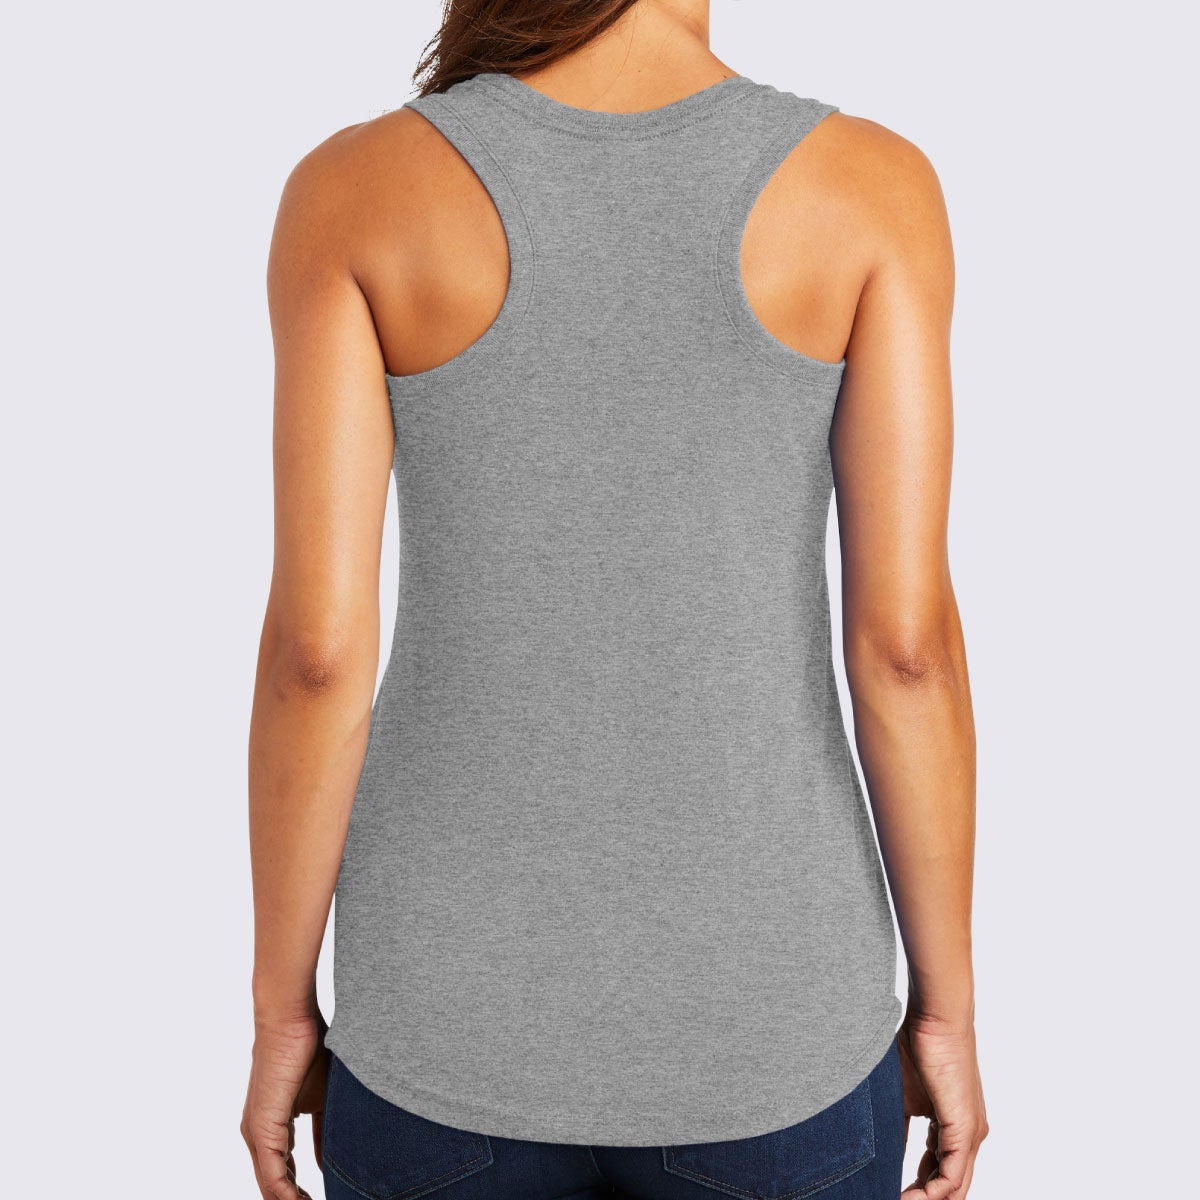 Heavy Weights &amp; Protein Shakes Women&#39;s Perfect Tri® Racerback Tank